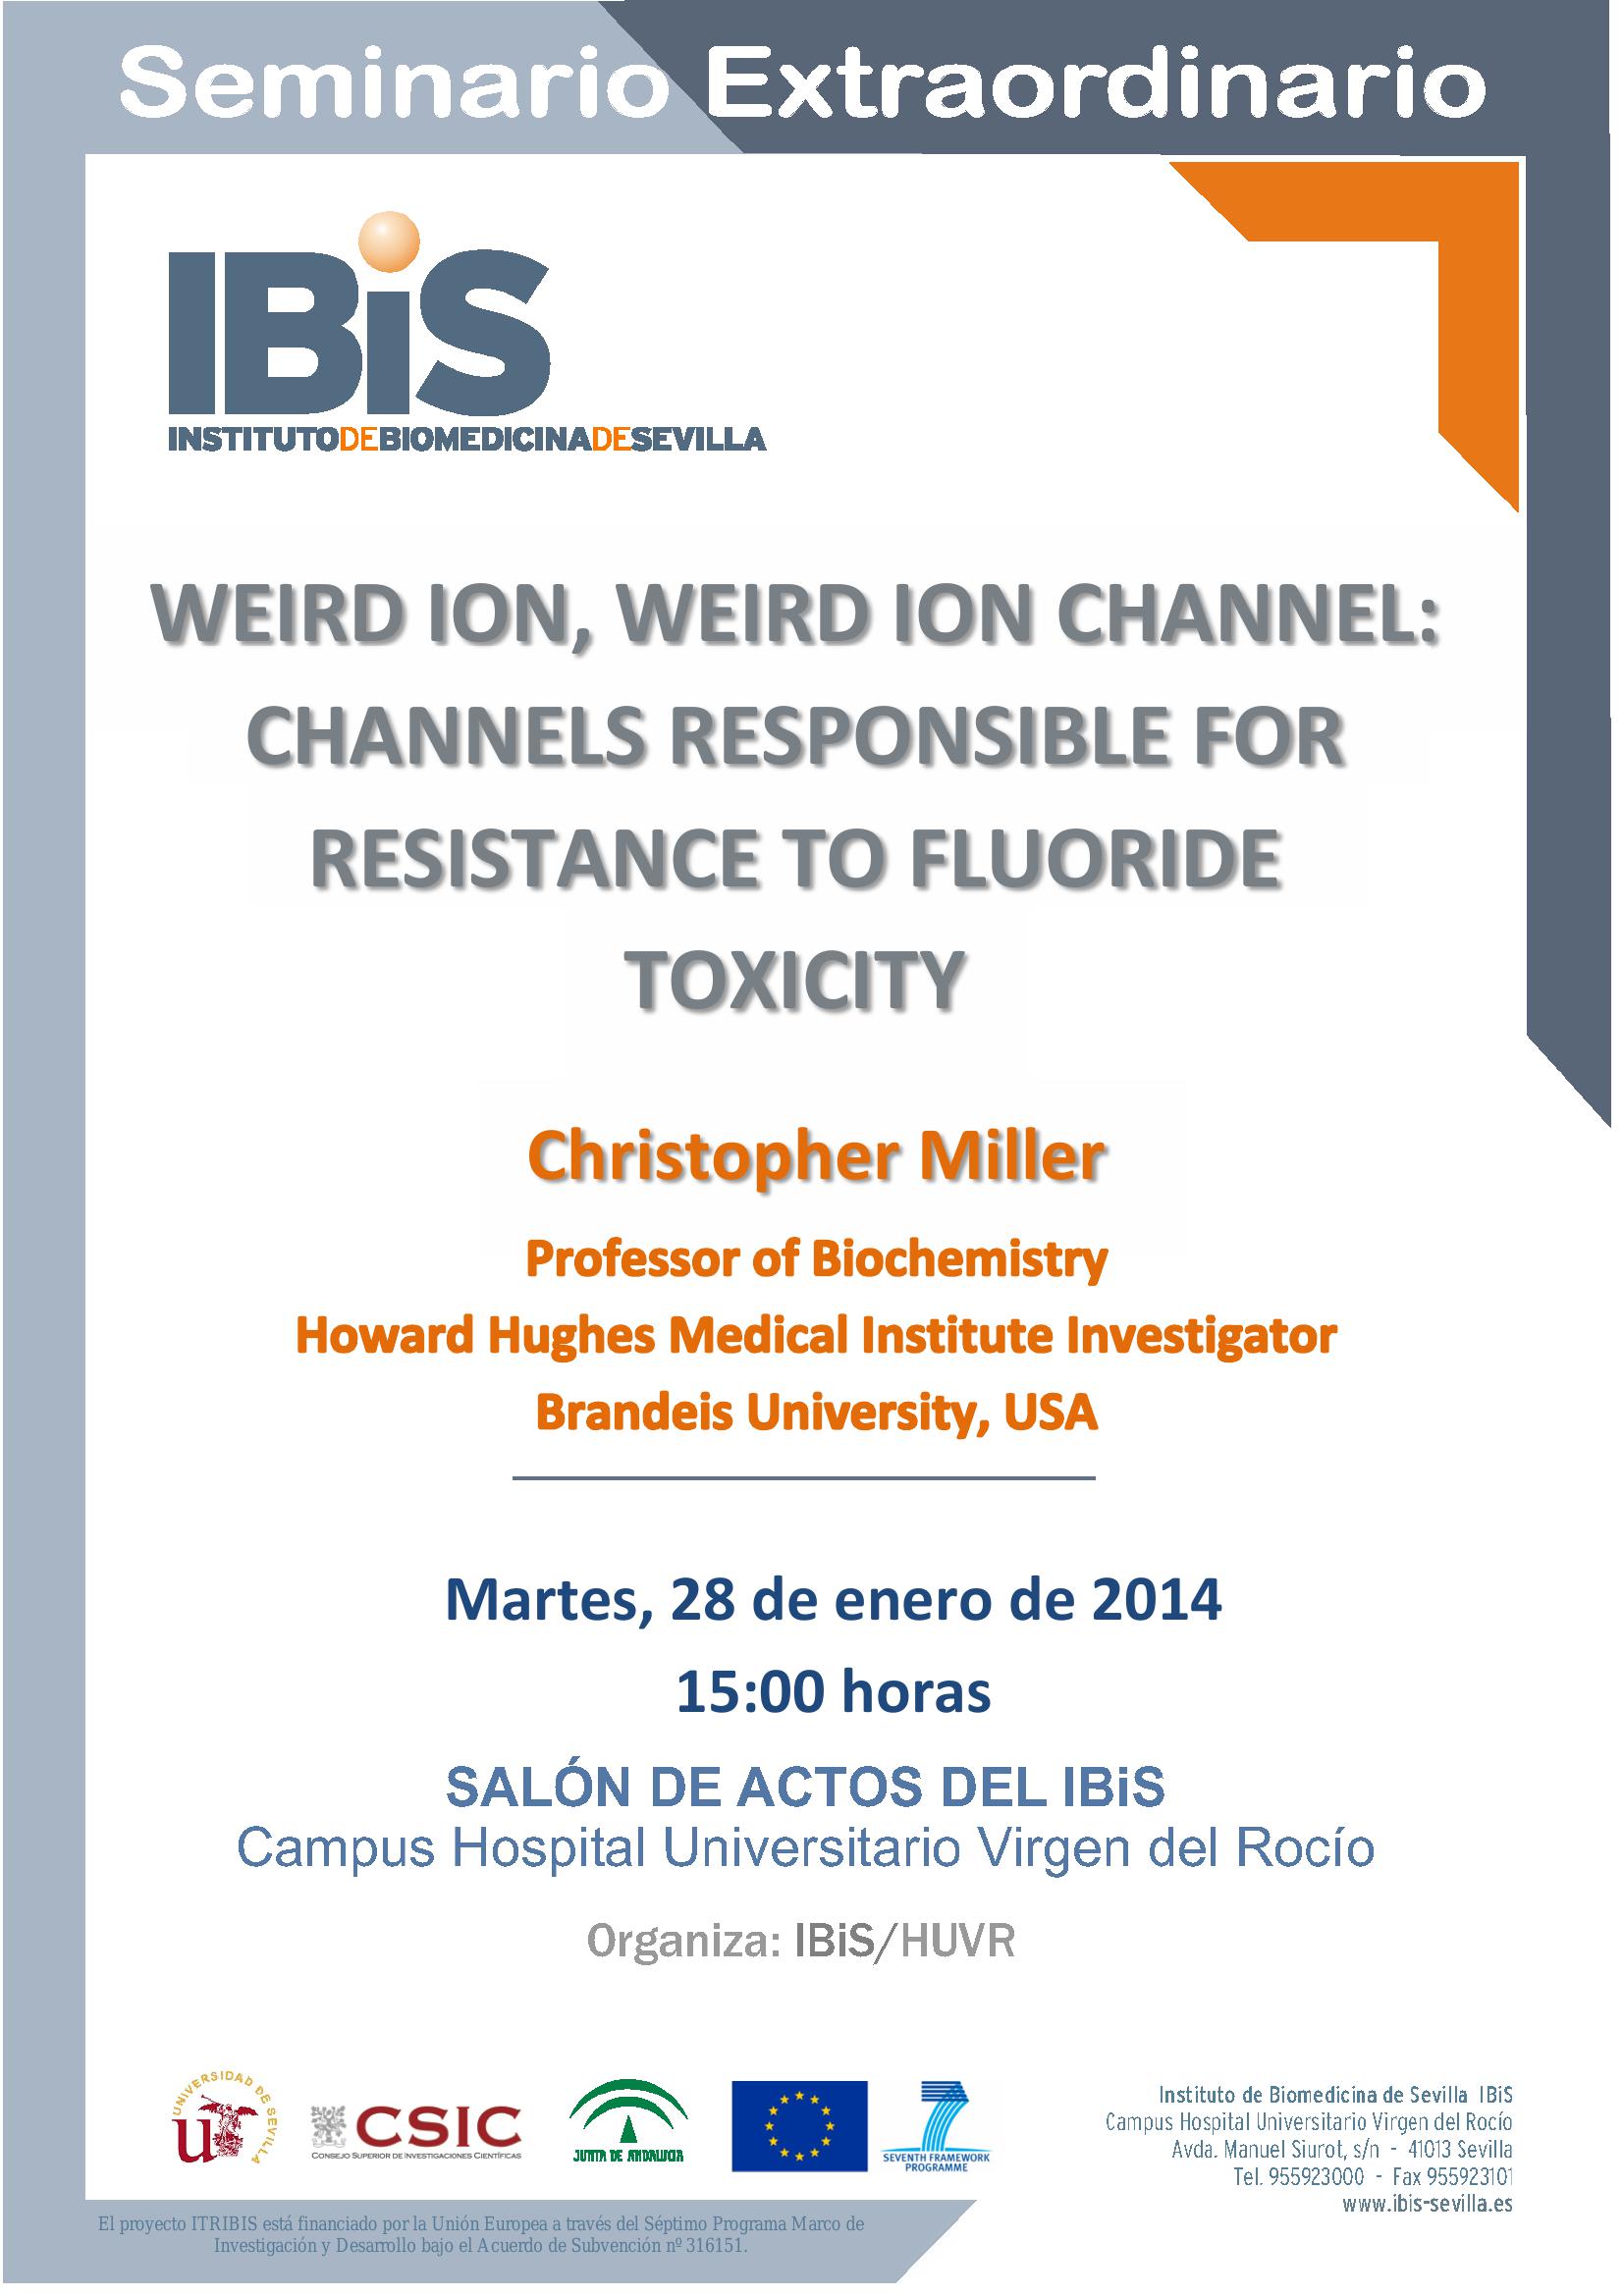 Poster: WEIRD ION, WEIRD ION CHANNEL: CHANNELS RESPONSIBLE FOR RESISTANCE TO FLUORIDE TOXICITY